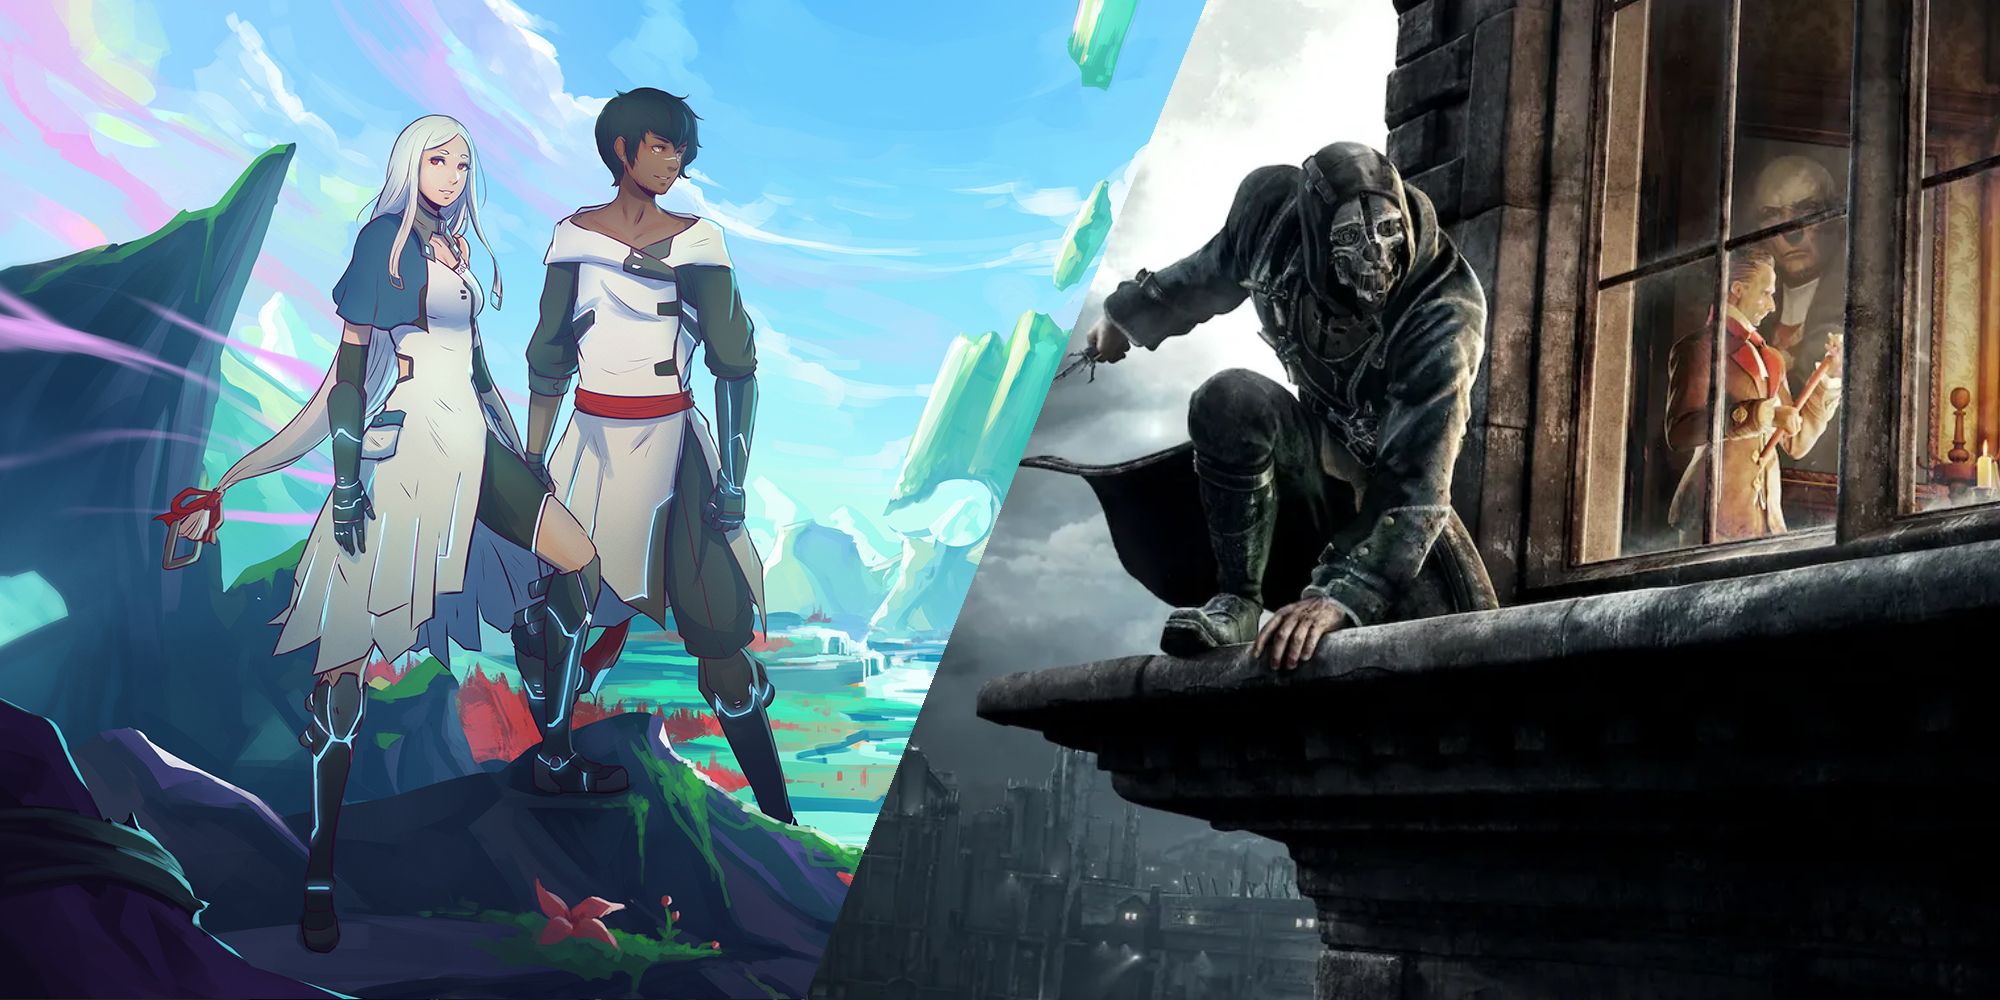 Shakespearean Video Games Featured Image (featuring official art from Dishonored and Haven)